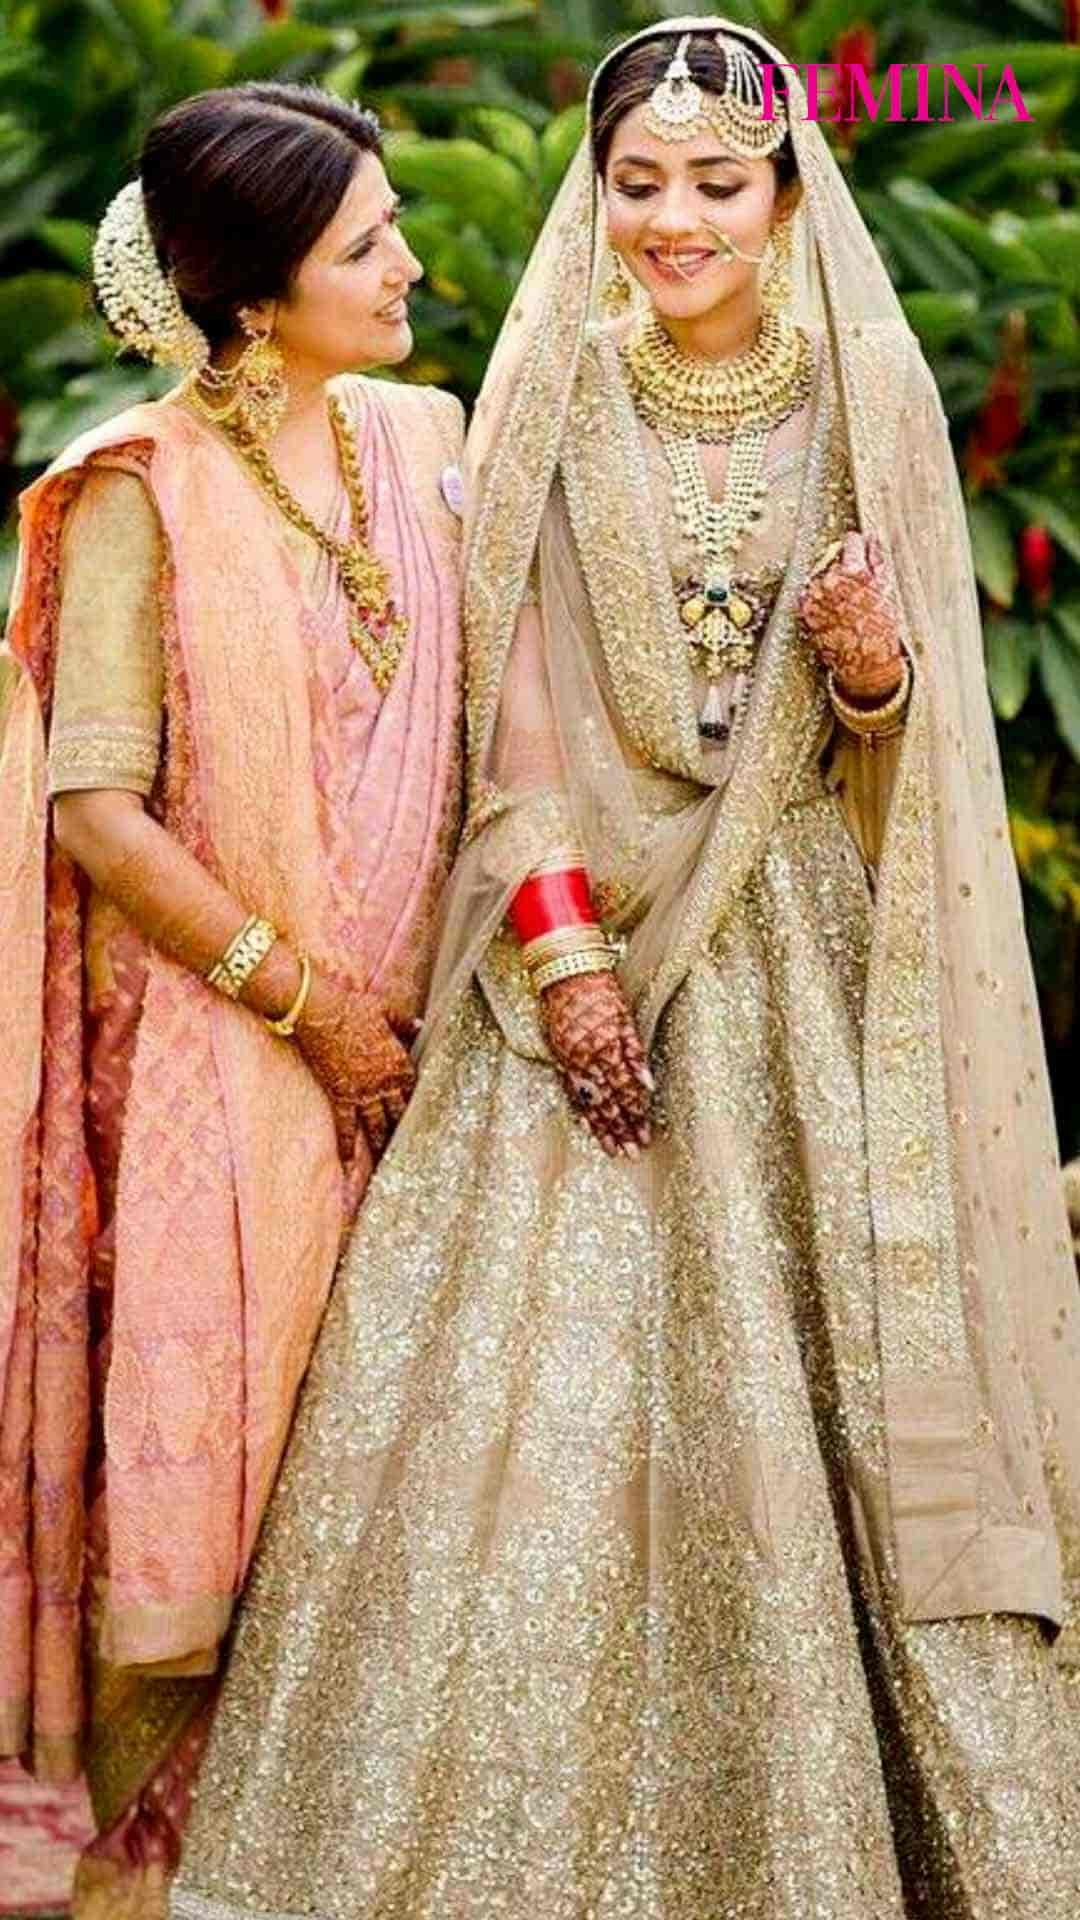 Katrina Kaif is the most stylish wedding guest in a regal beige lehenga |  Times of India